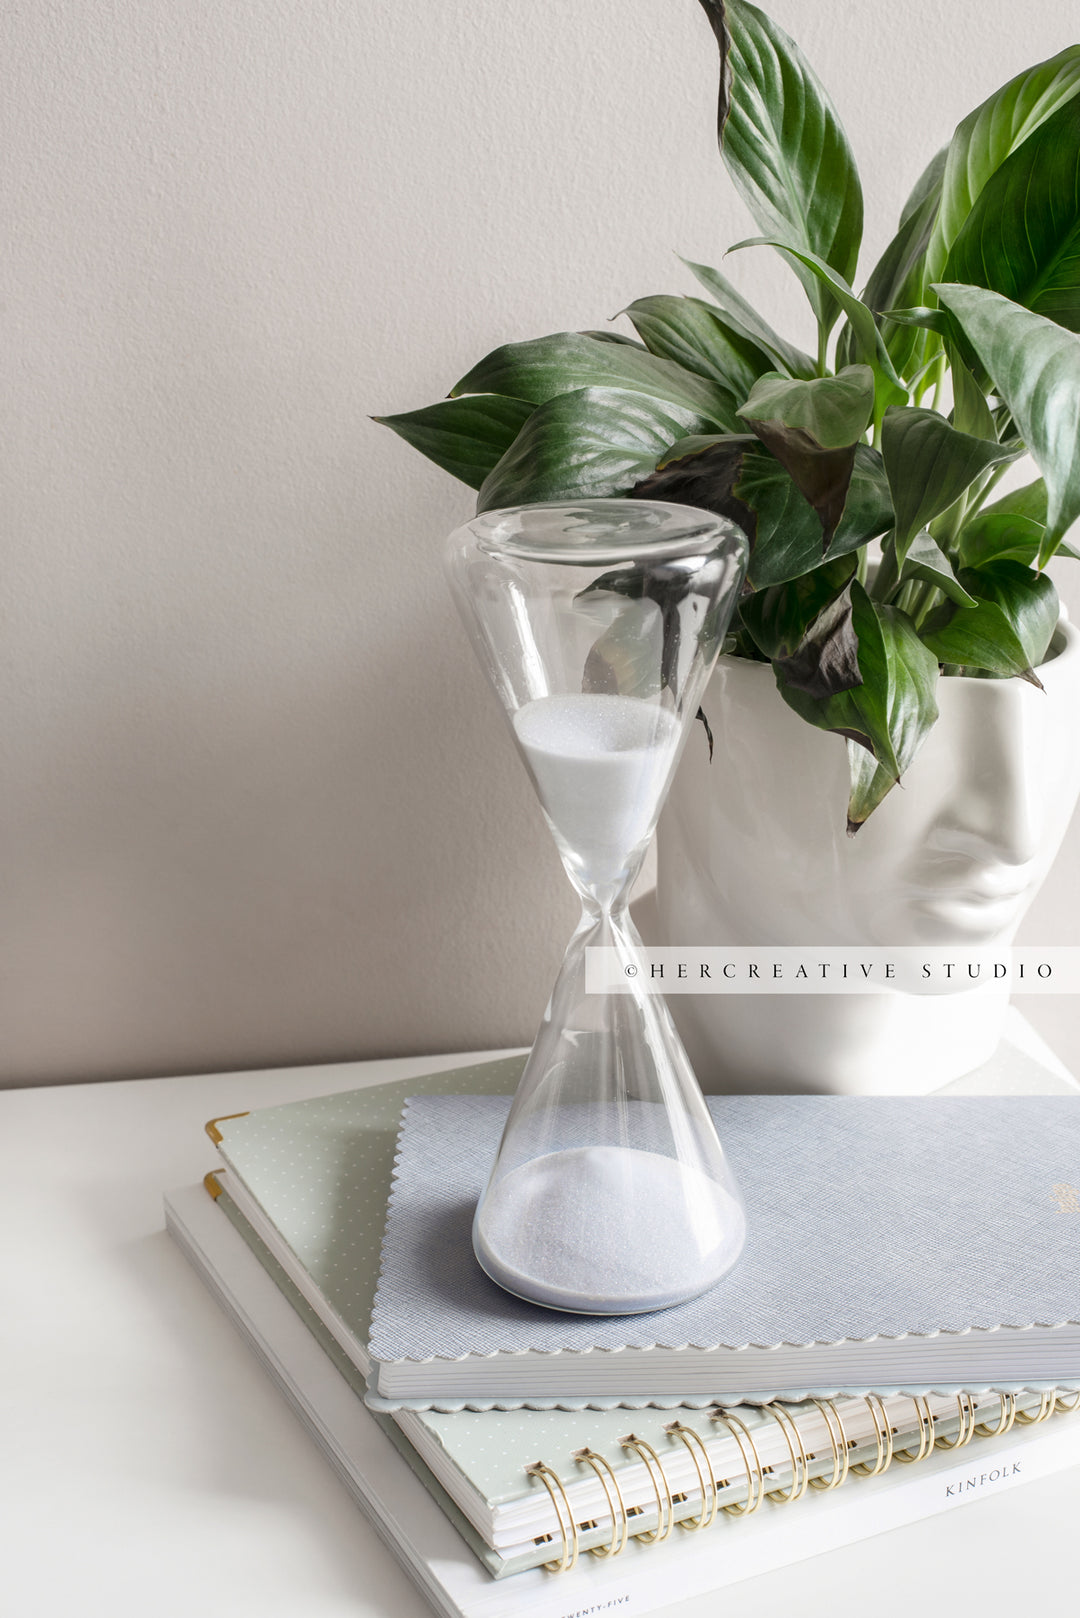 Hourglass, Notebooks and Bust with Greenery. Stock Image